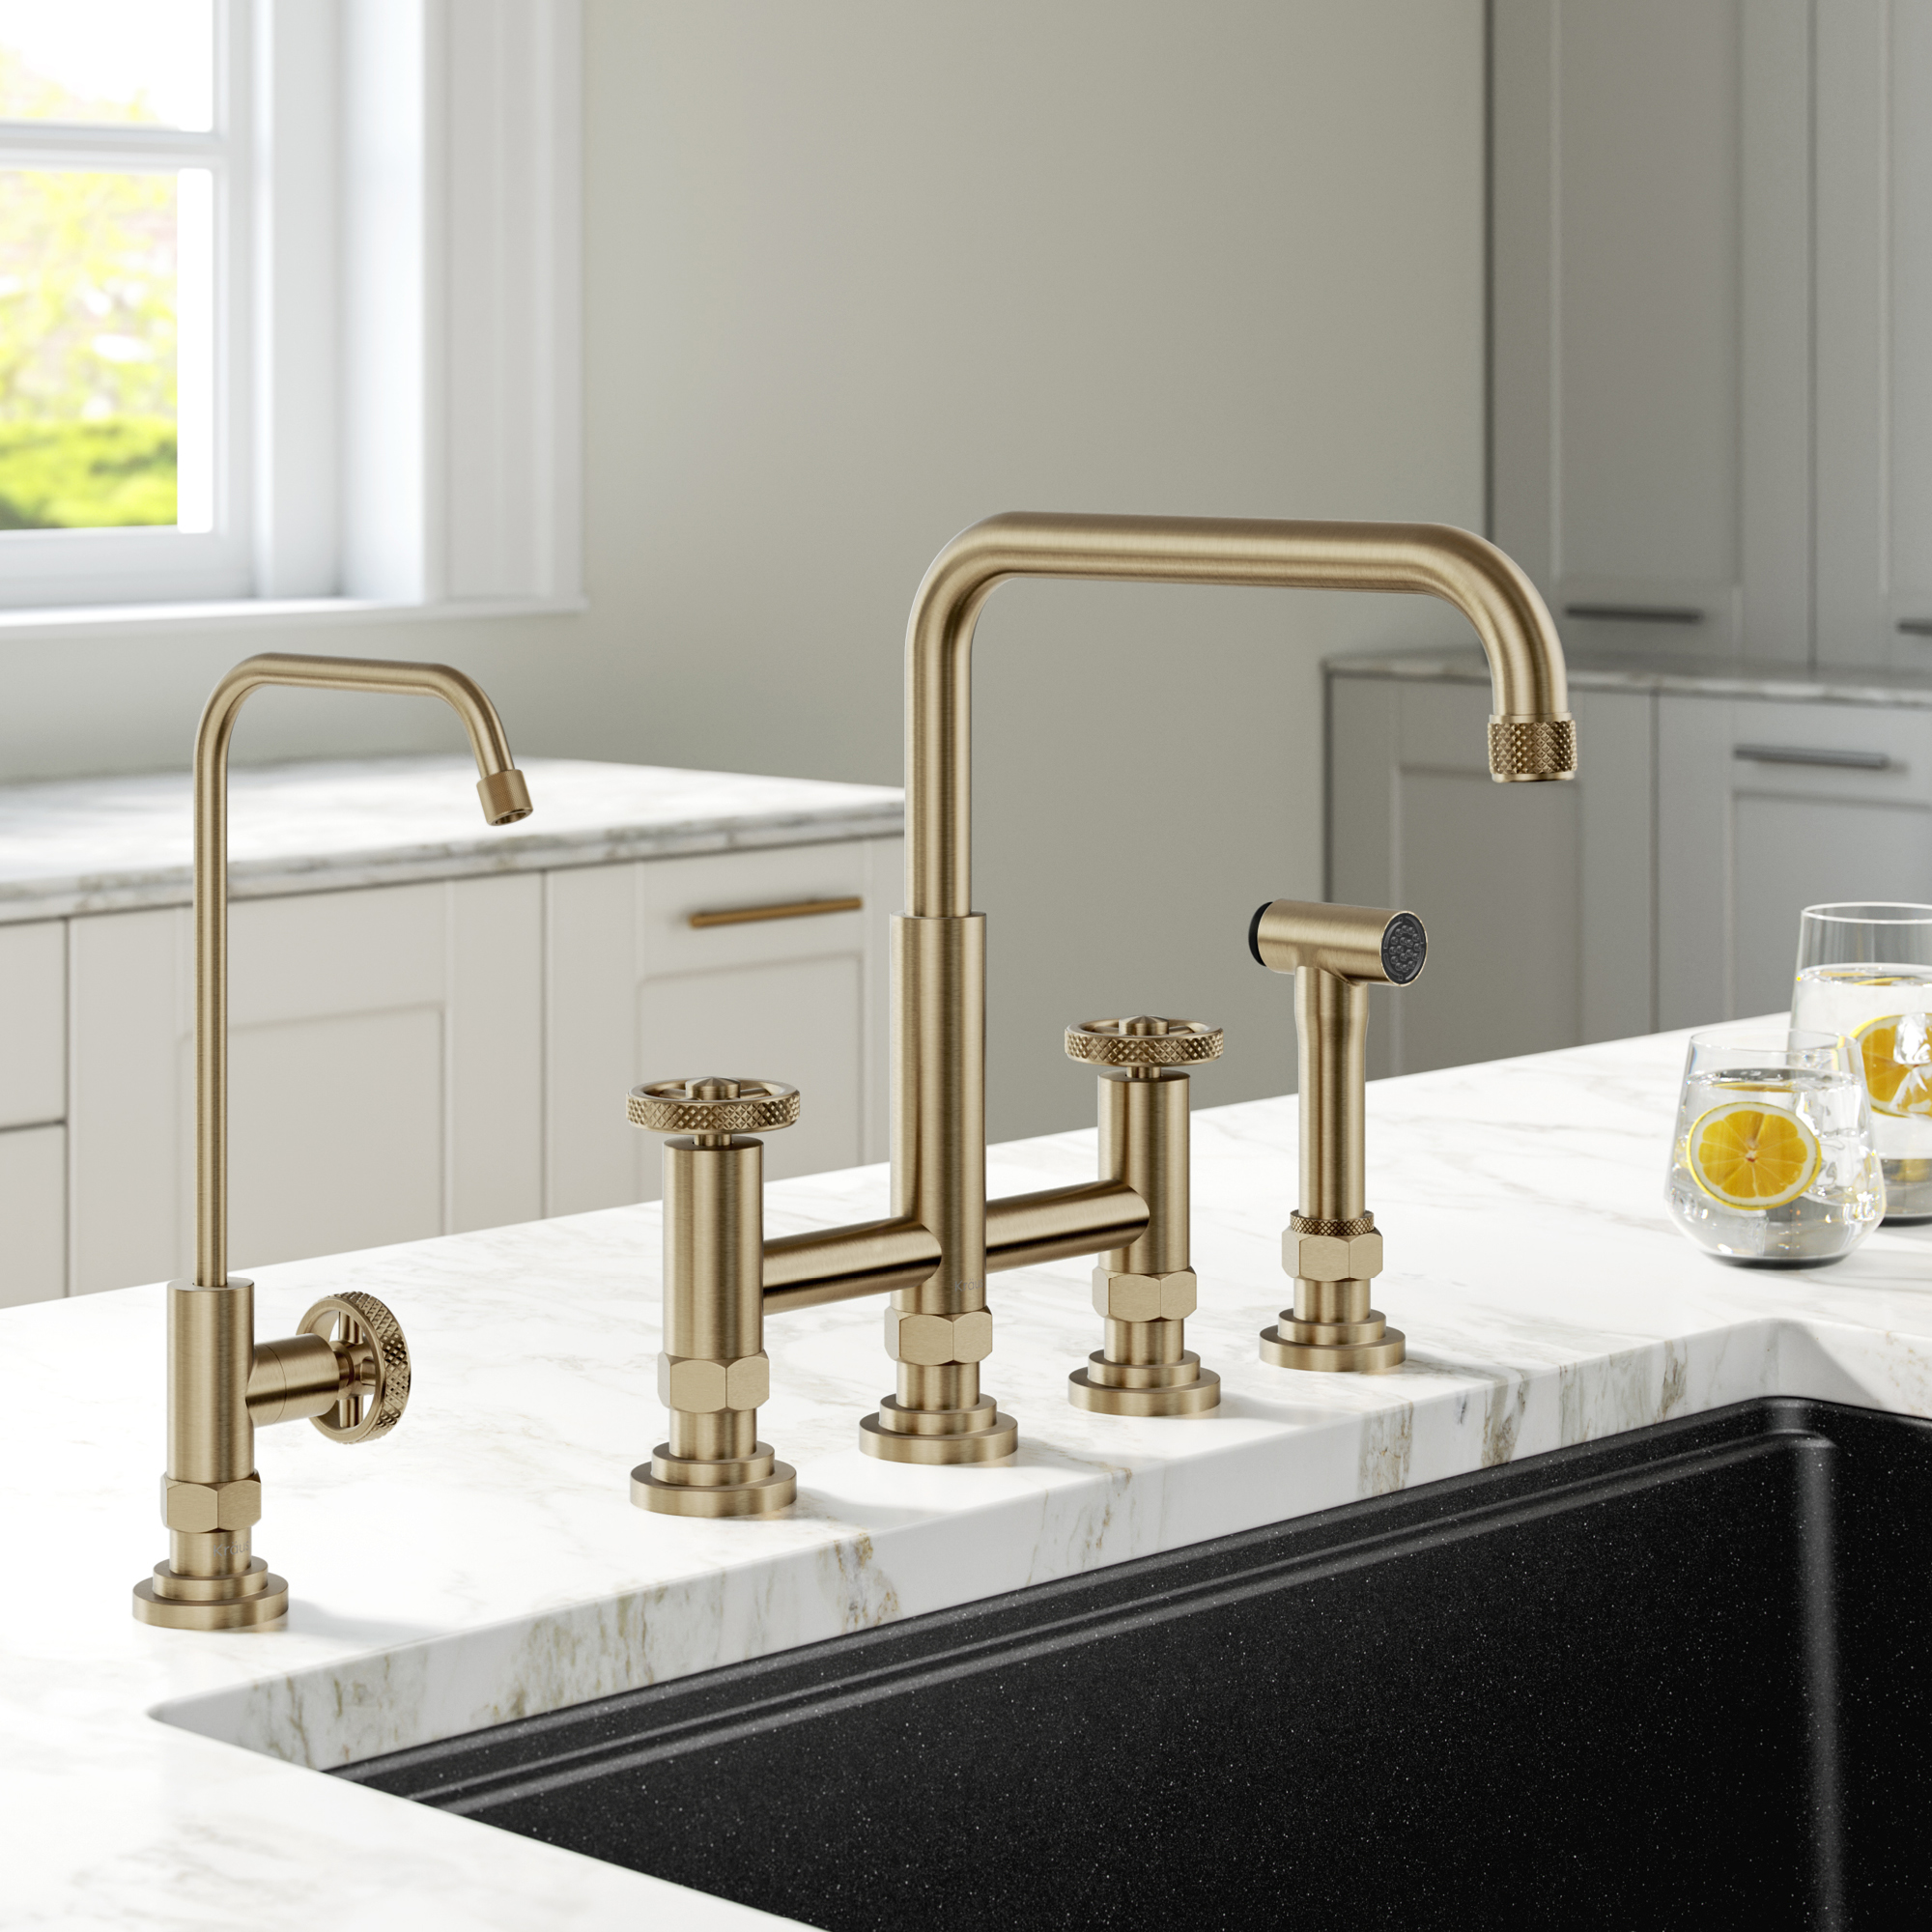 KRAUS Urbix™ Industrial Bridge Kitchen Faucet and Water Filter Faucet Combo in Brushed Gold - image 3 of 12